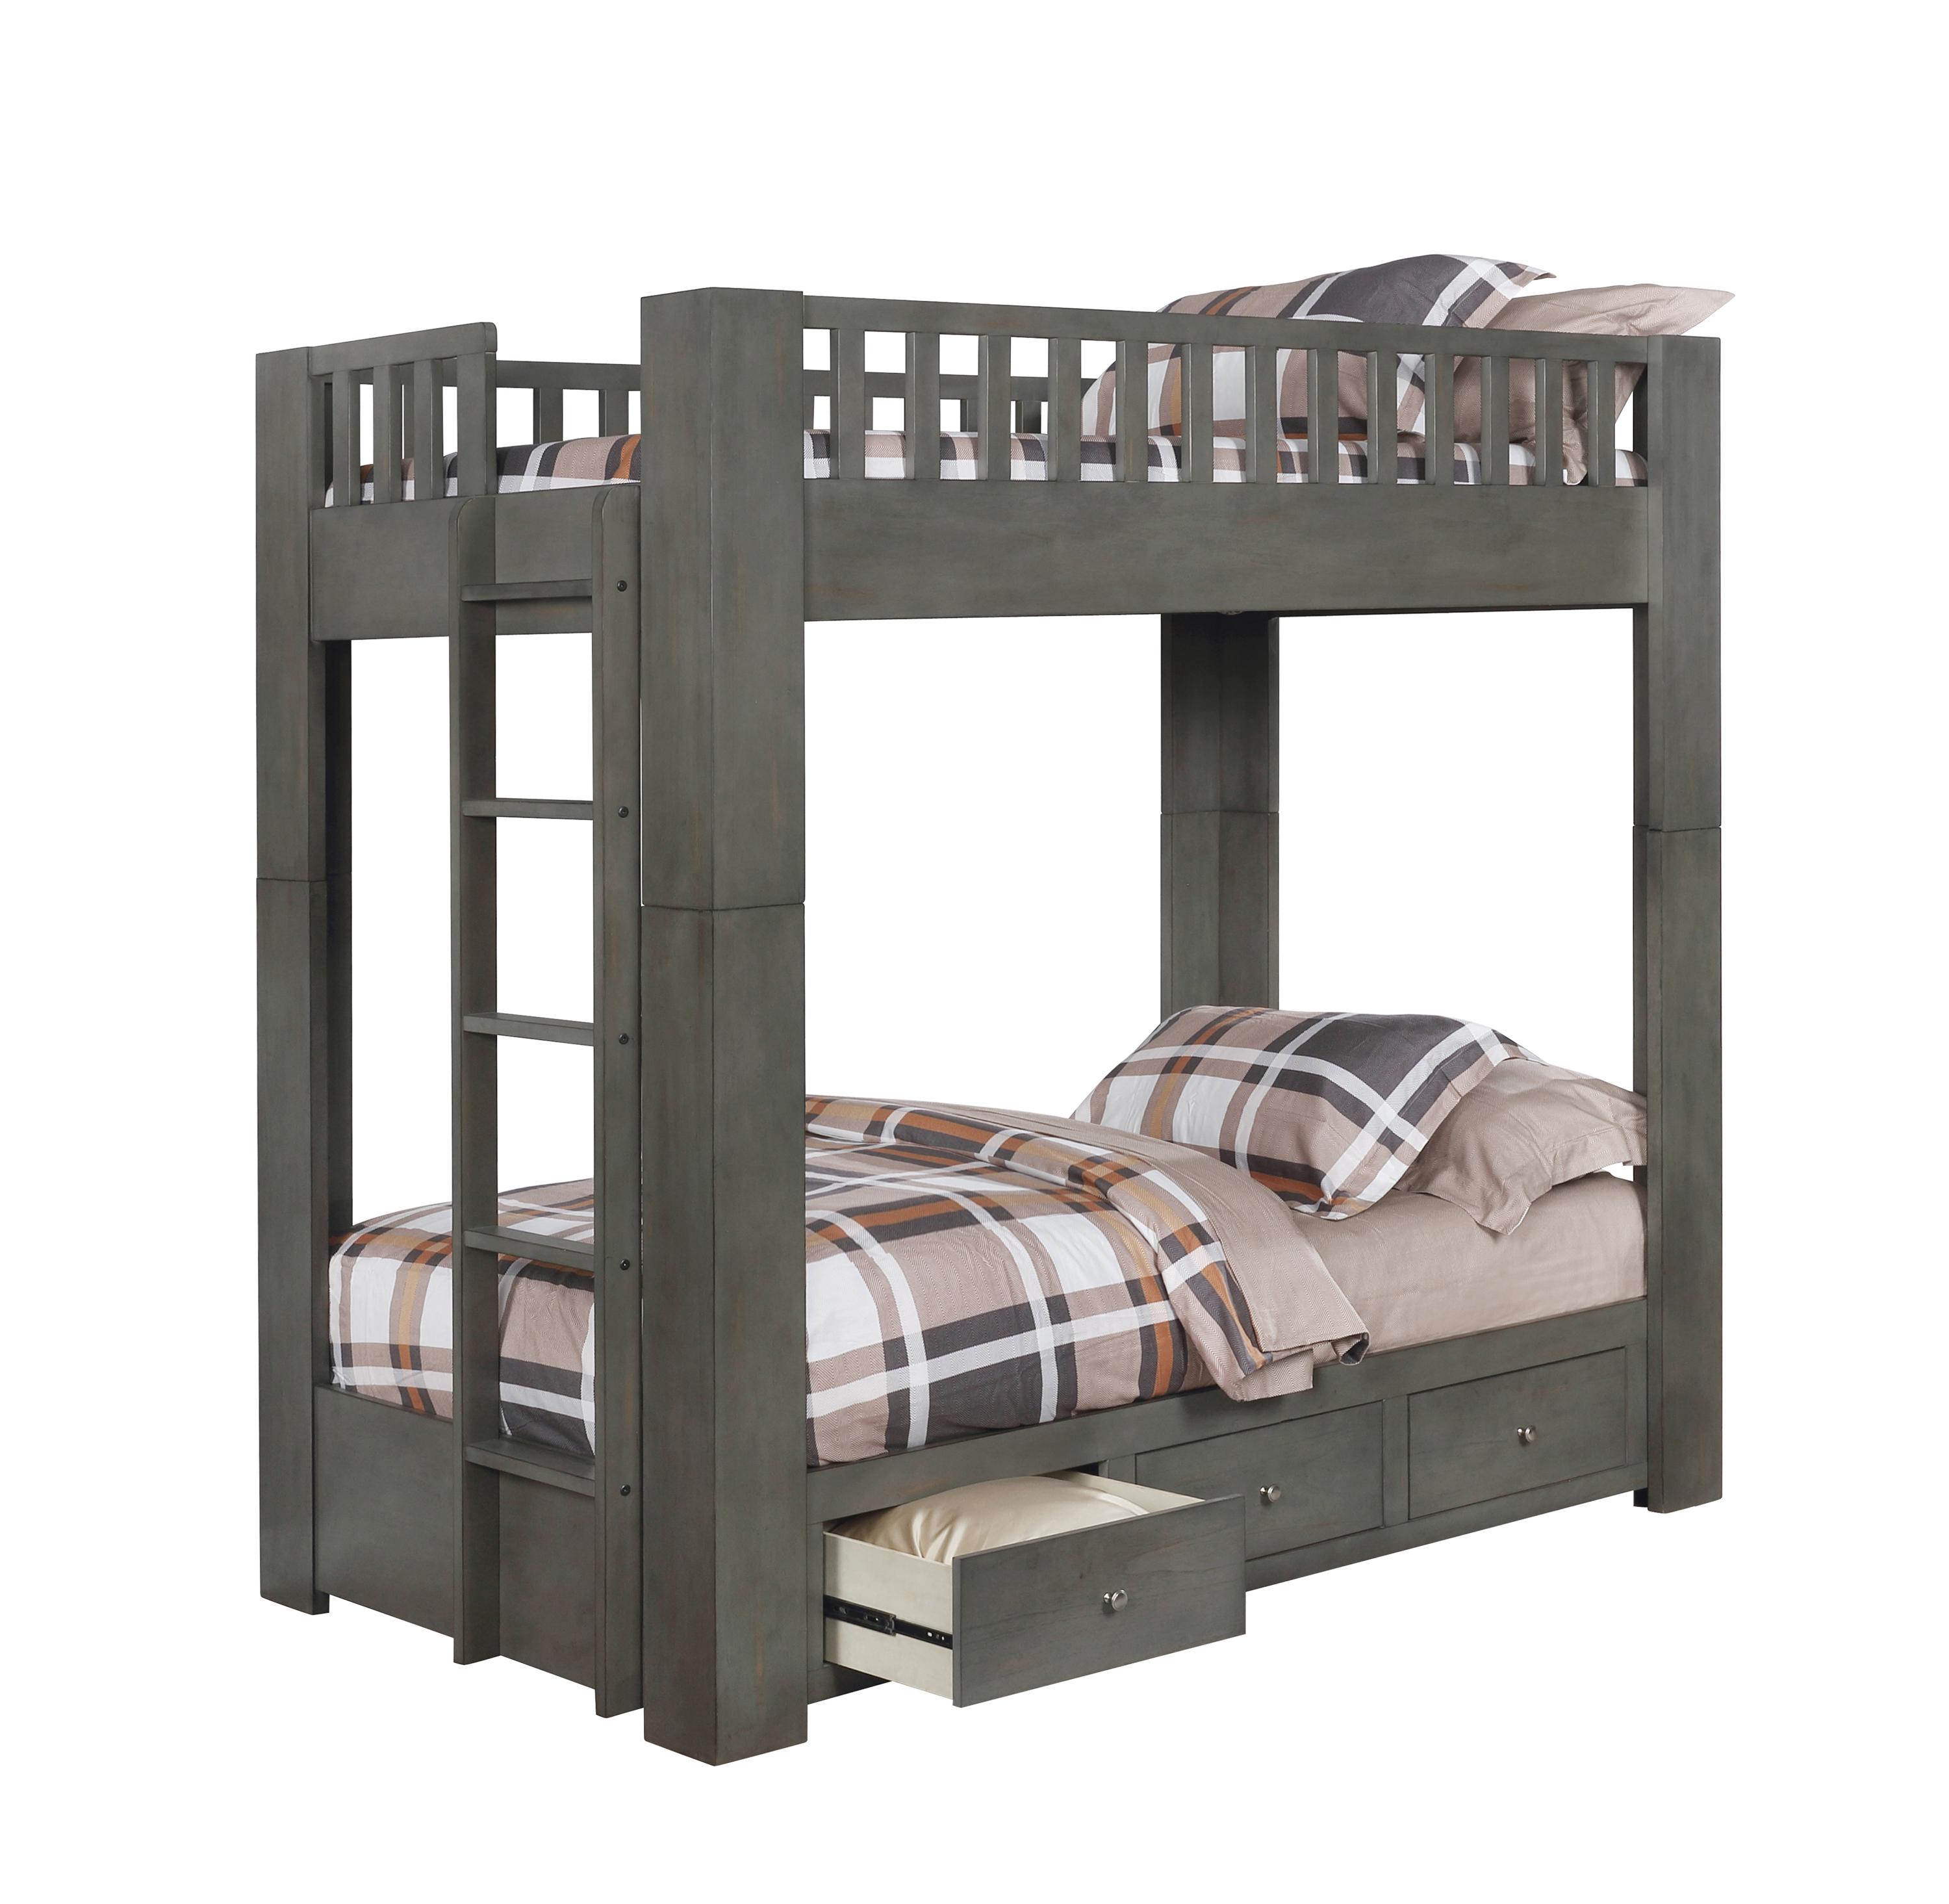 Modern Bunk Bed 461308 Wenco 461308 in Gray 